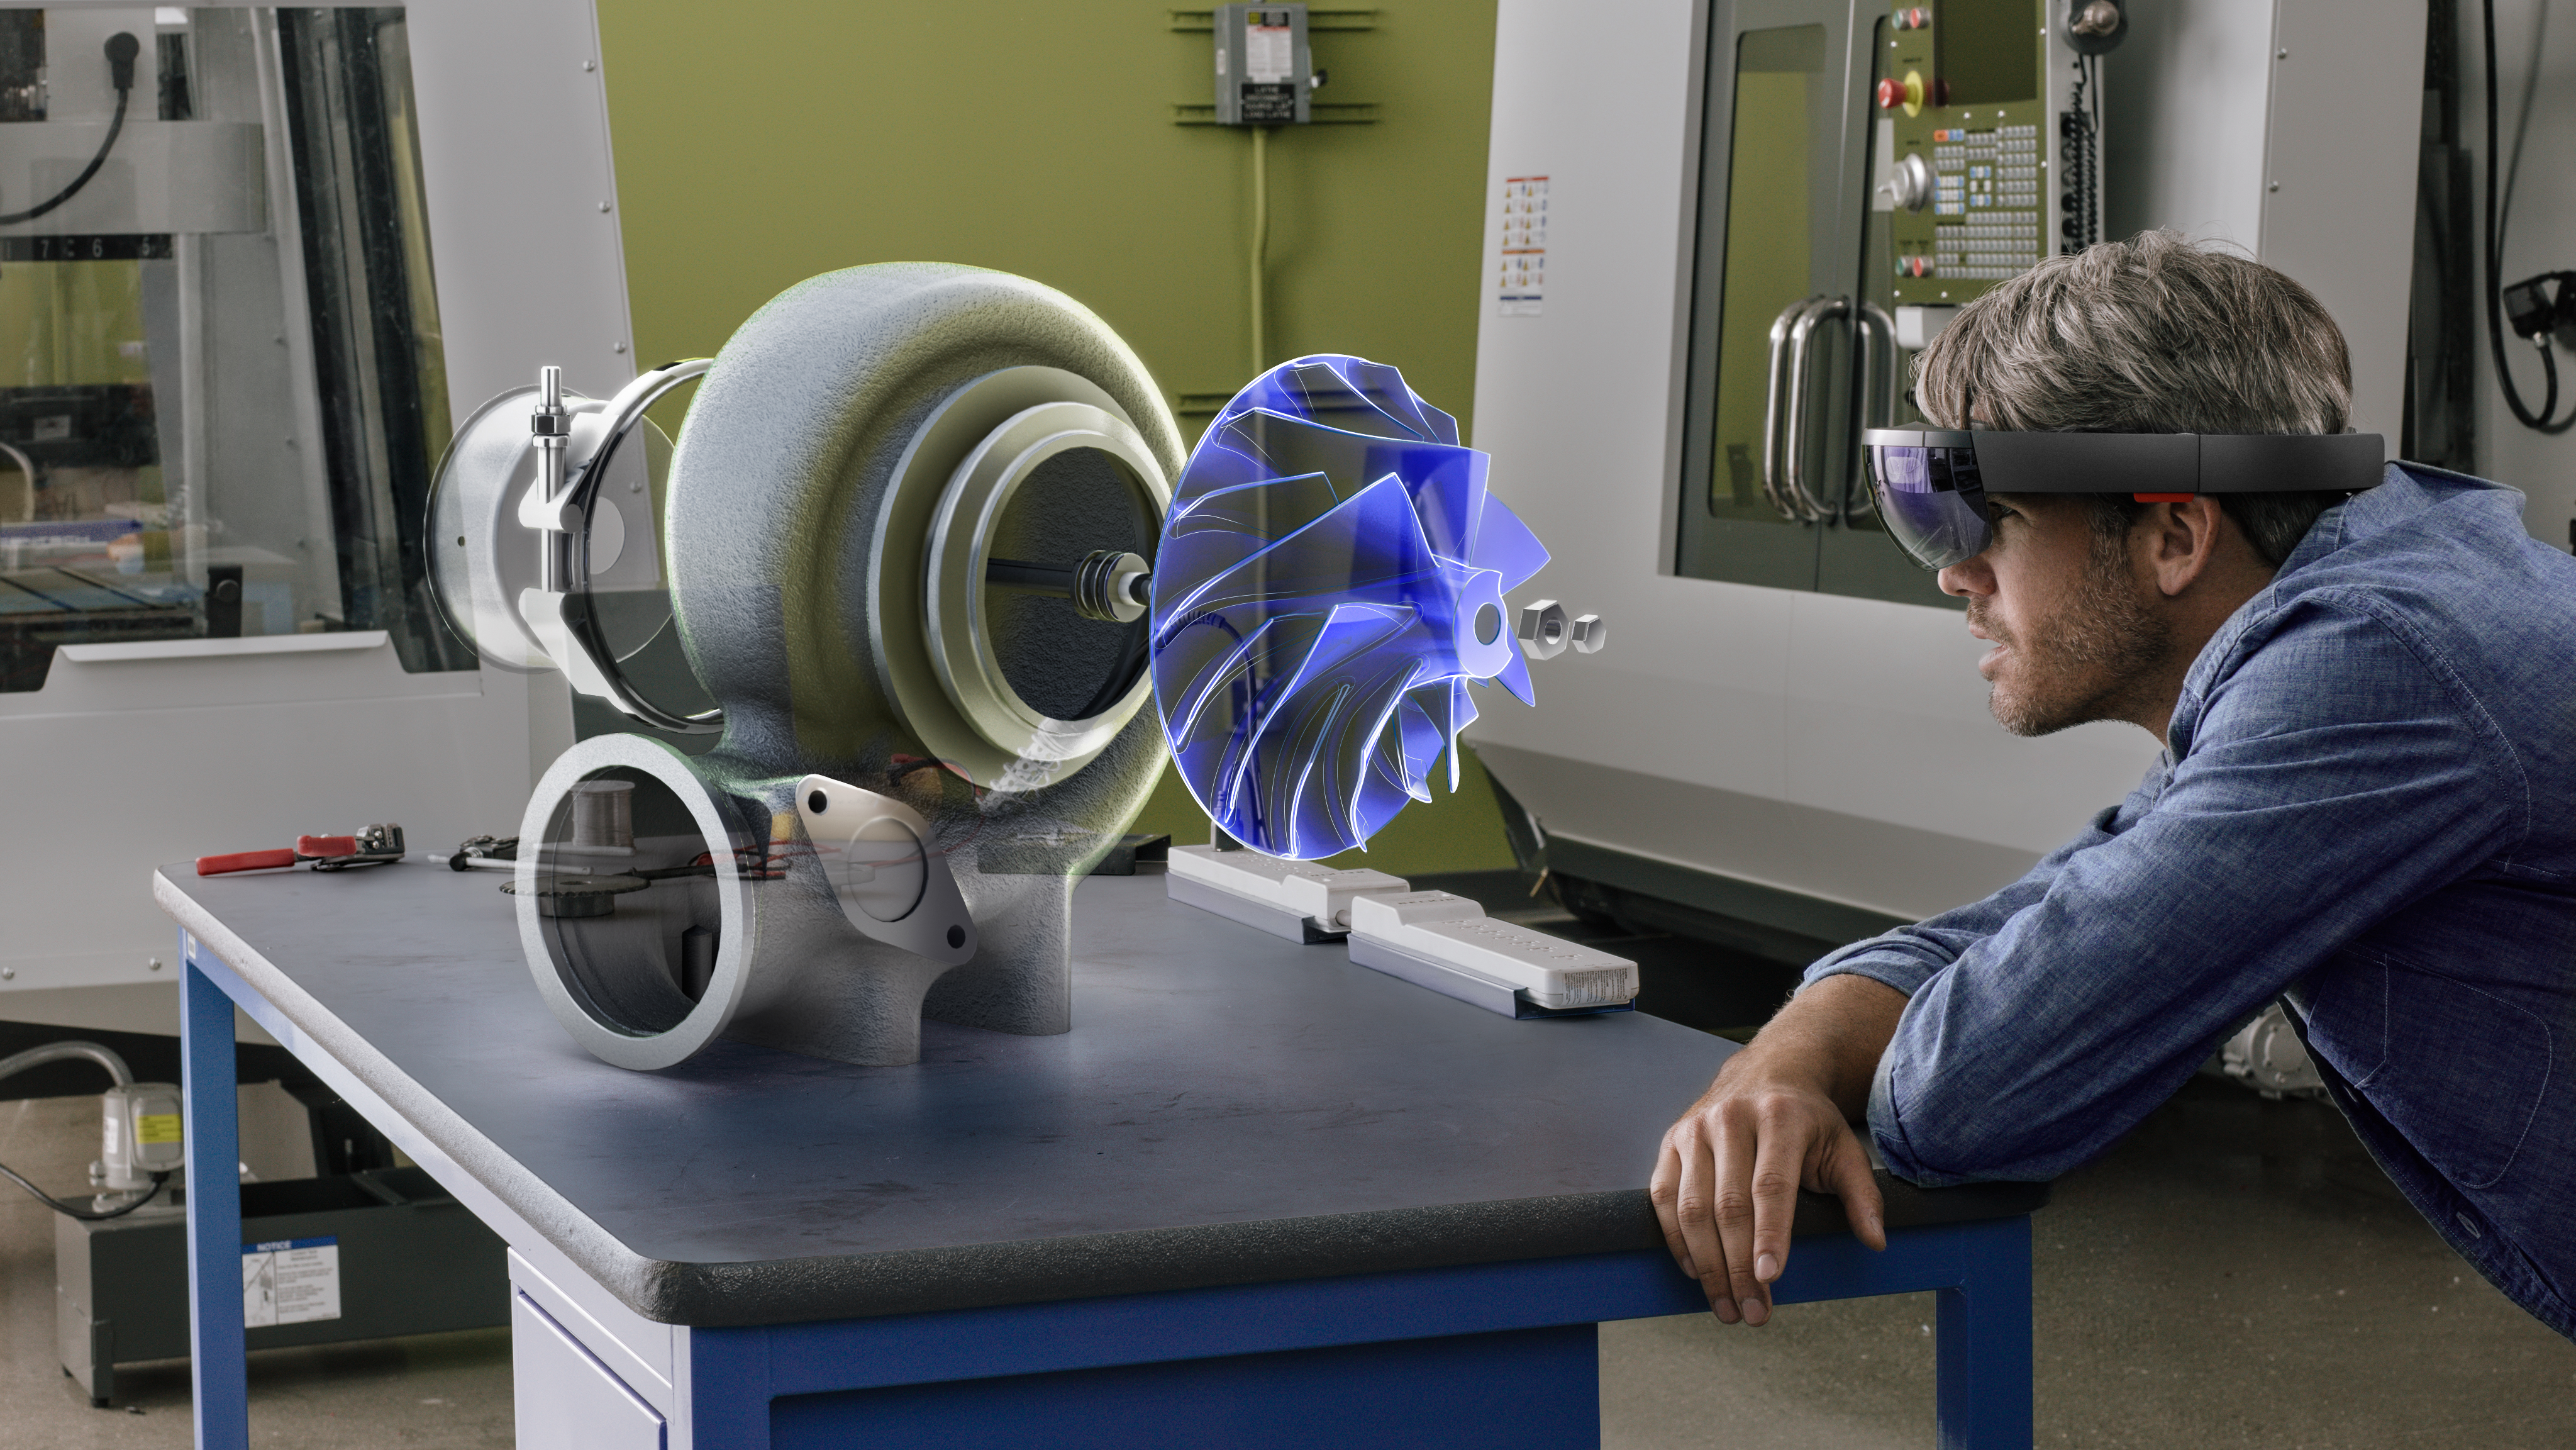 Microsoft's mixed reality is for developers, not the public